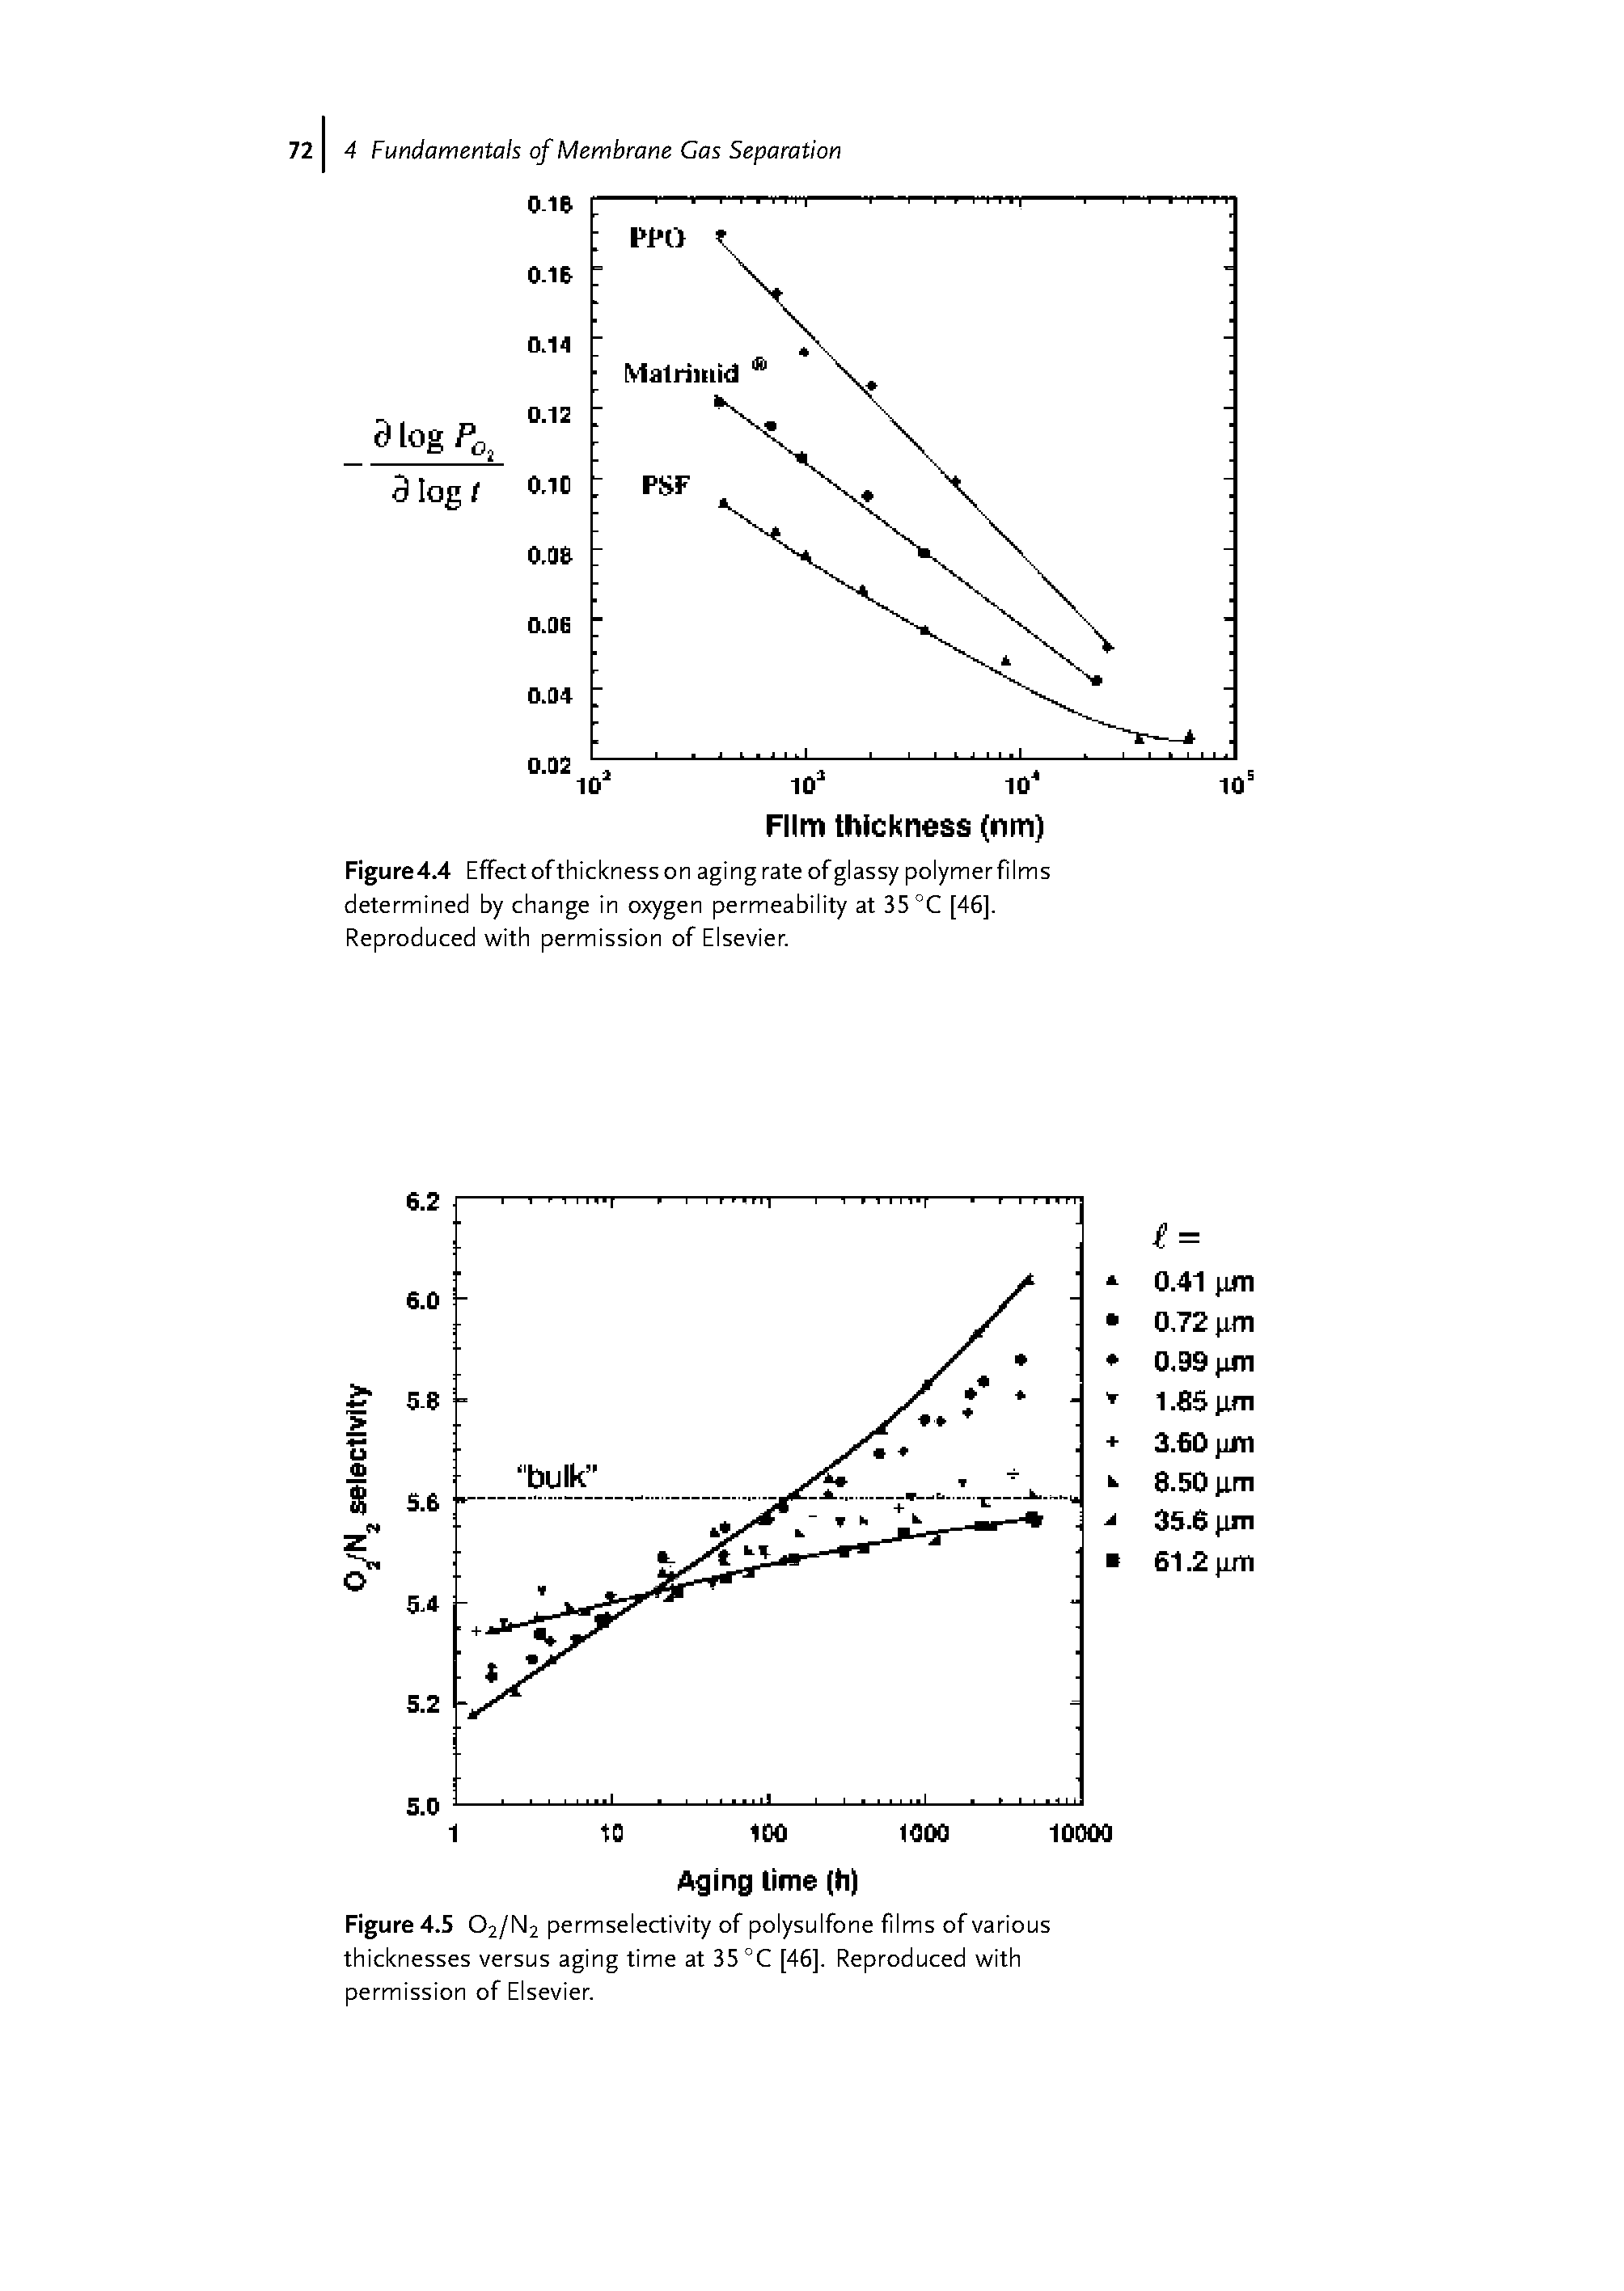 Figure4.4 Effect of thickness on aging rate of glassy polymer films determined by change in oxygen permeability at 35 °C [46]. Reproduced with permission of Elsevier.